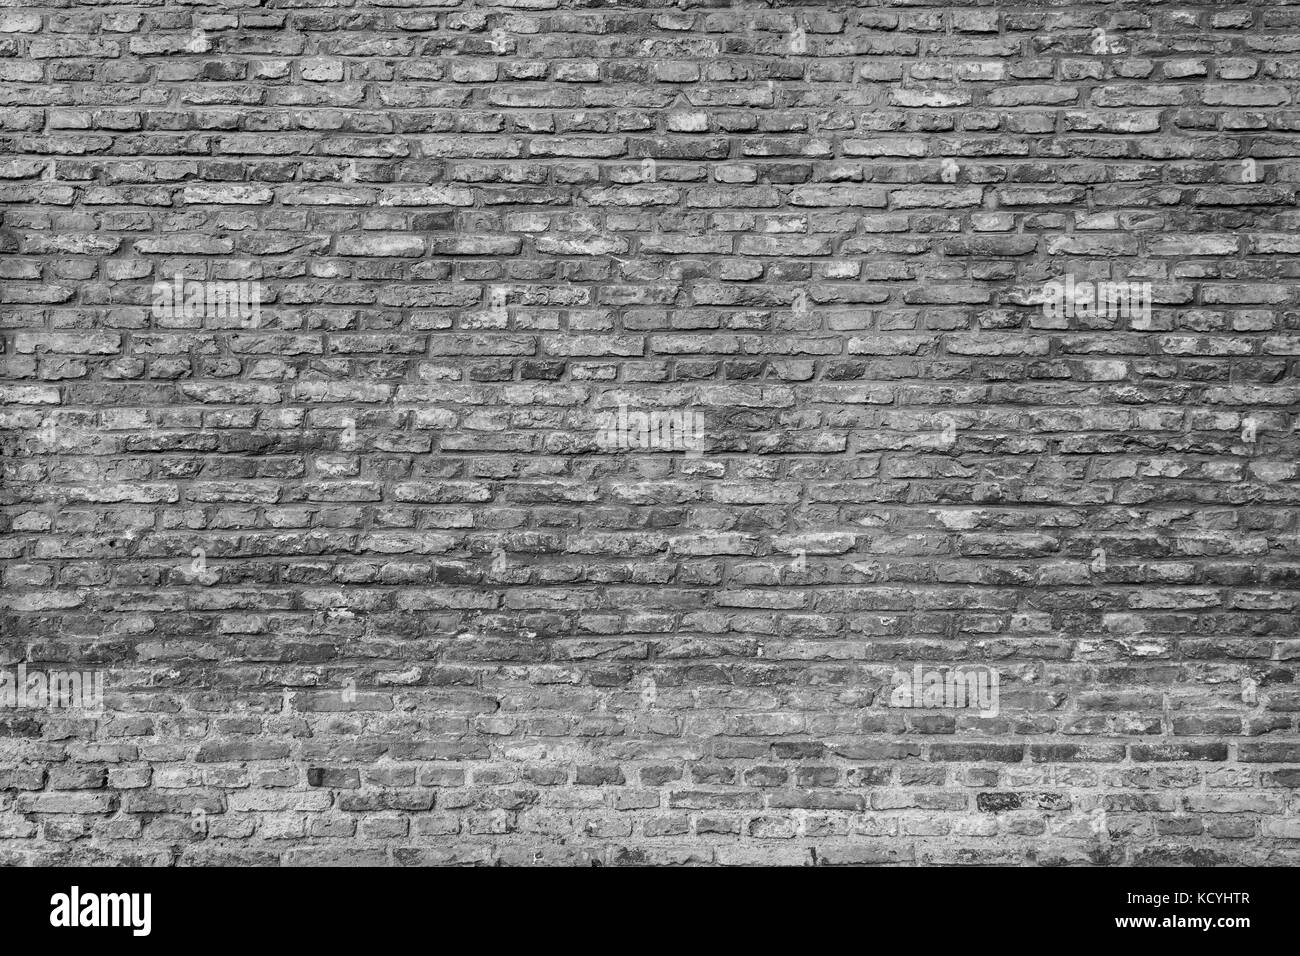 Old and aged brick wall texture background in black and white. Stock Photo